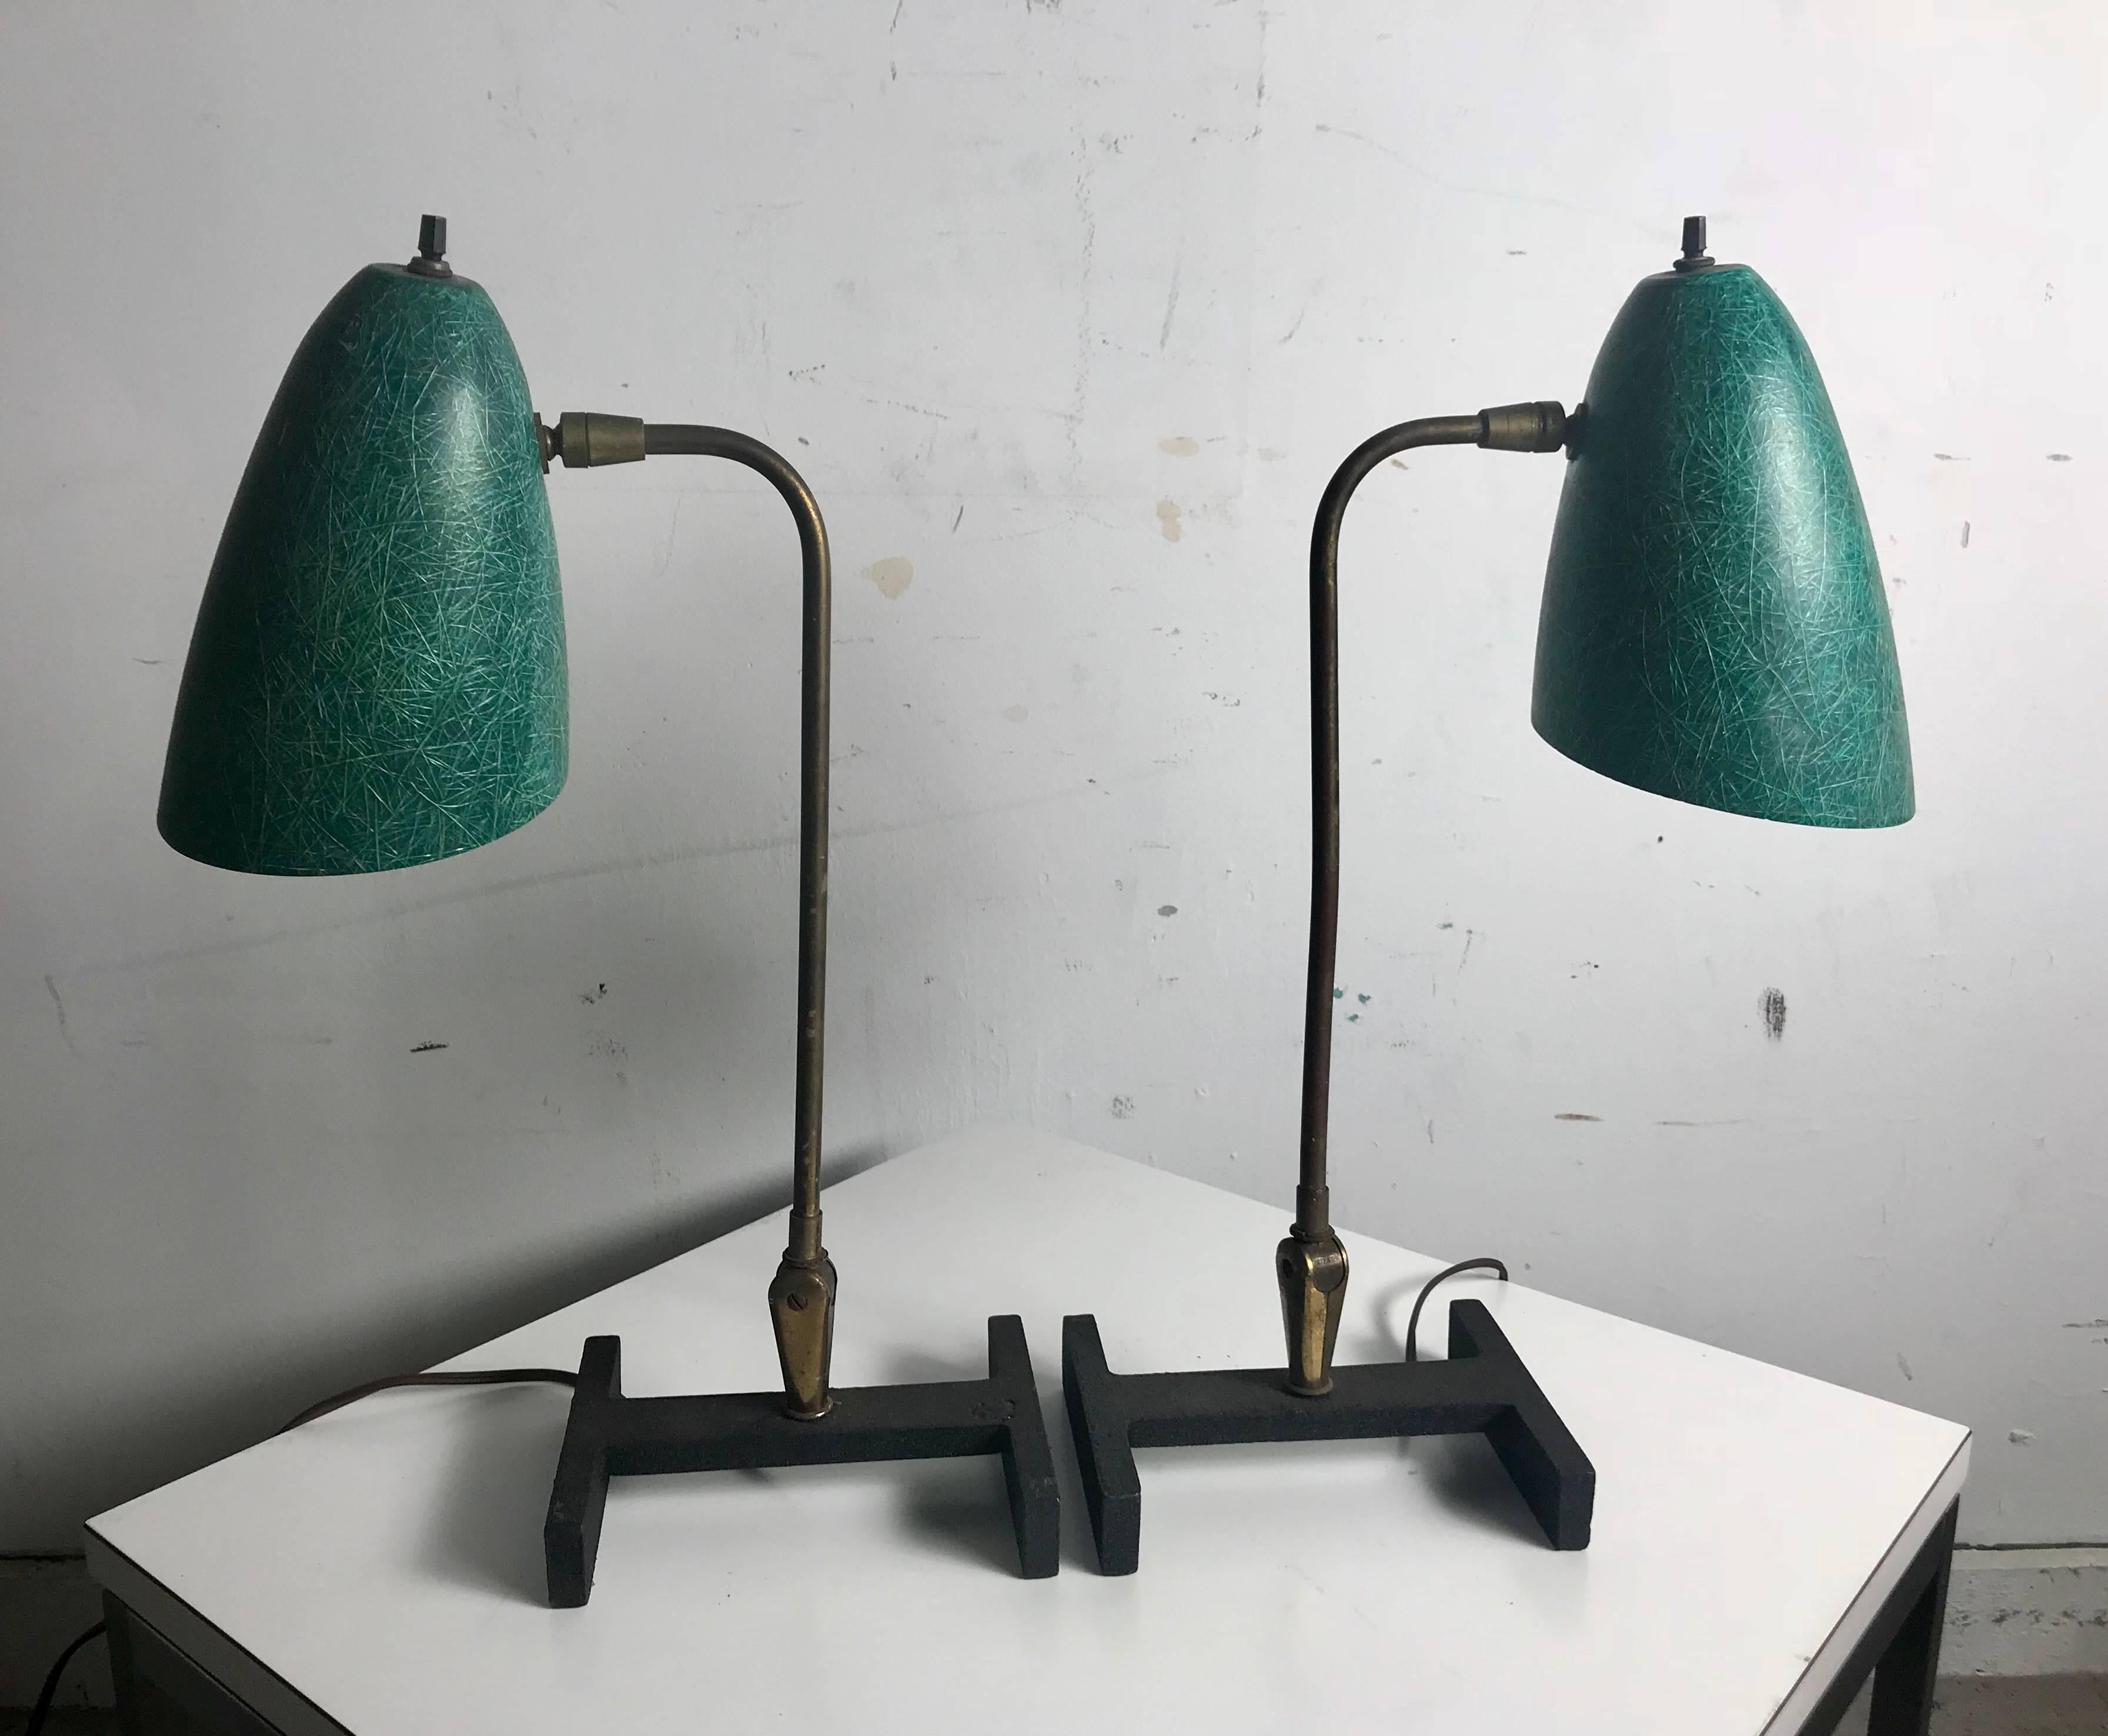 Matched Pair Modernist Task ,desk Lamps, Amazing green spun exposed fiberglass shades, adjustable brass fittings and cast angle iron base, Stunning design, multi position.